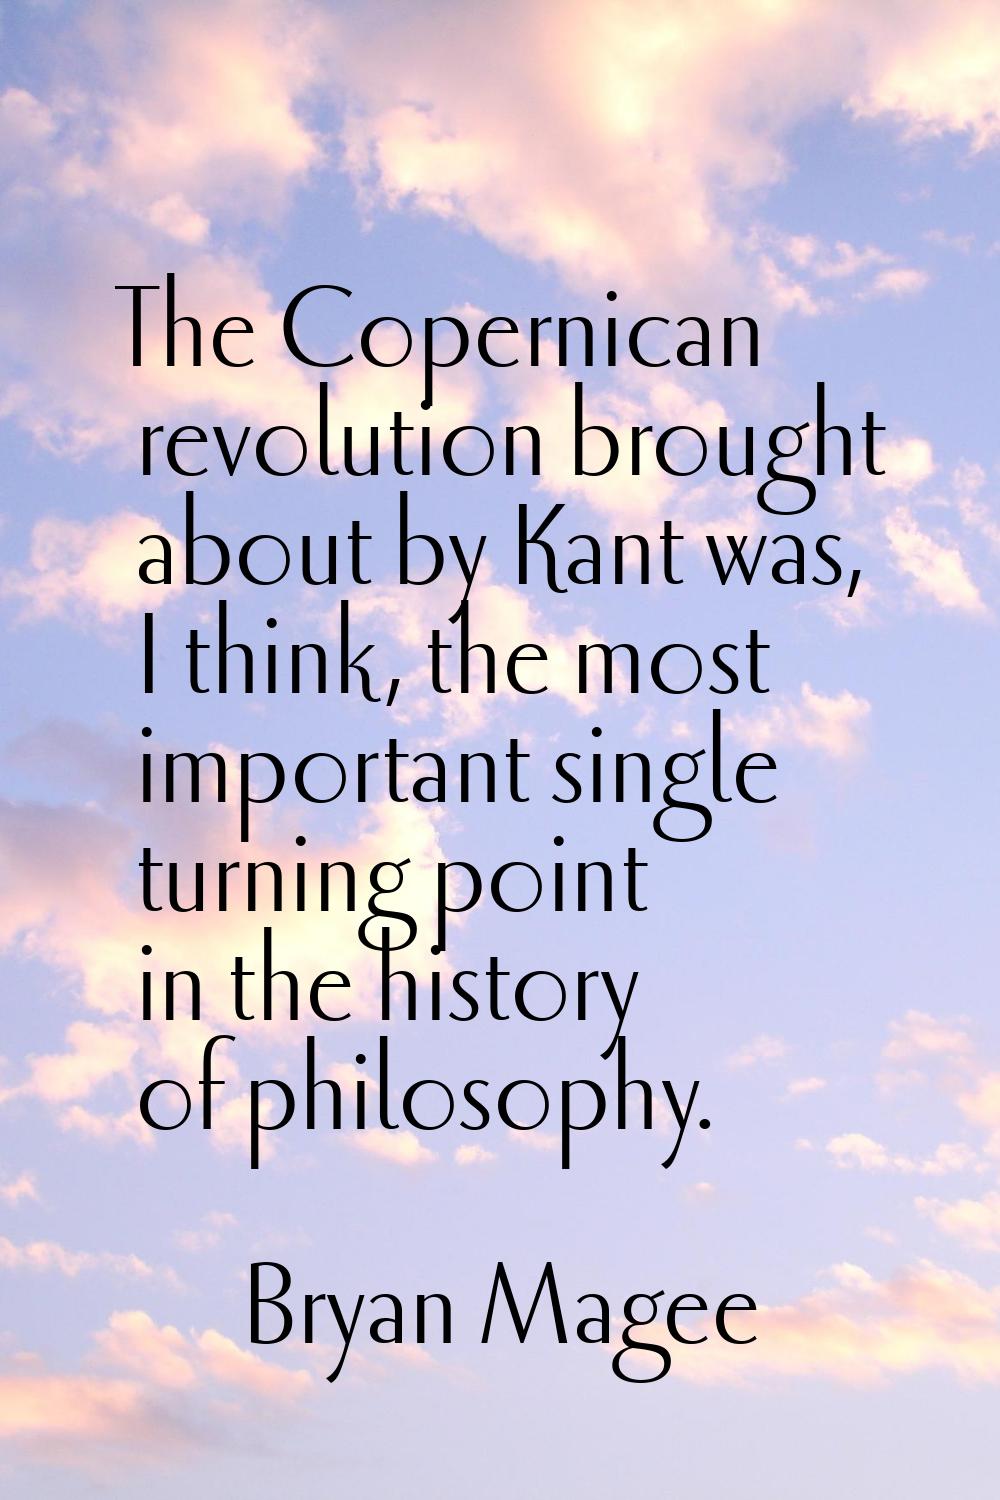 The Copernican revolution brought about by Kant was, I think, the most important single turning poi